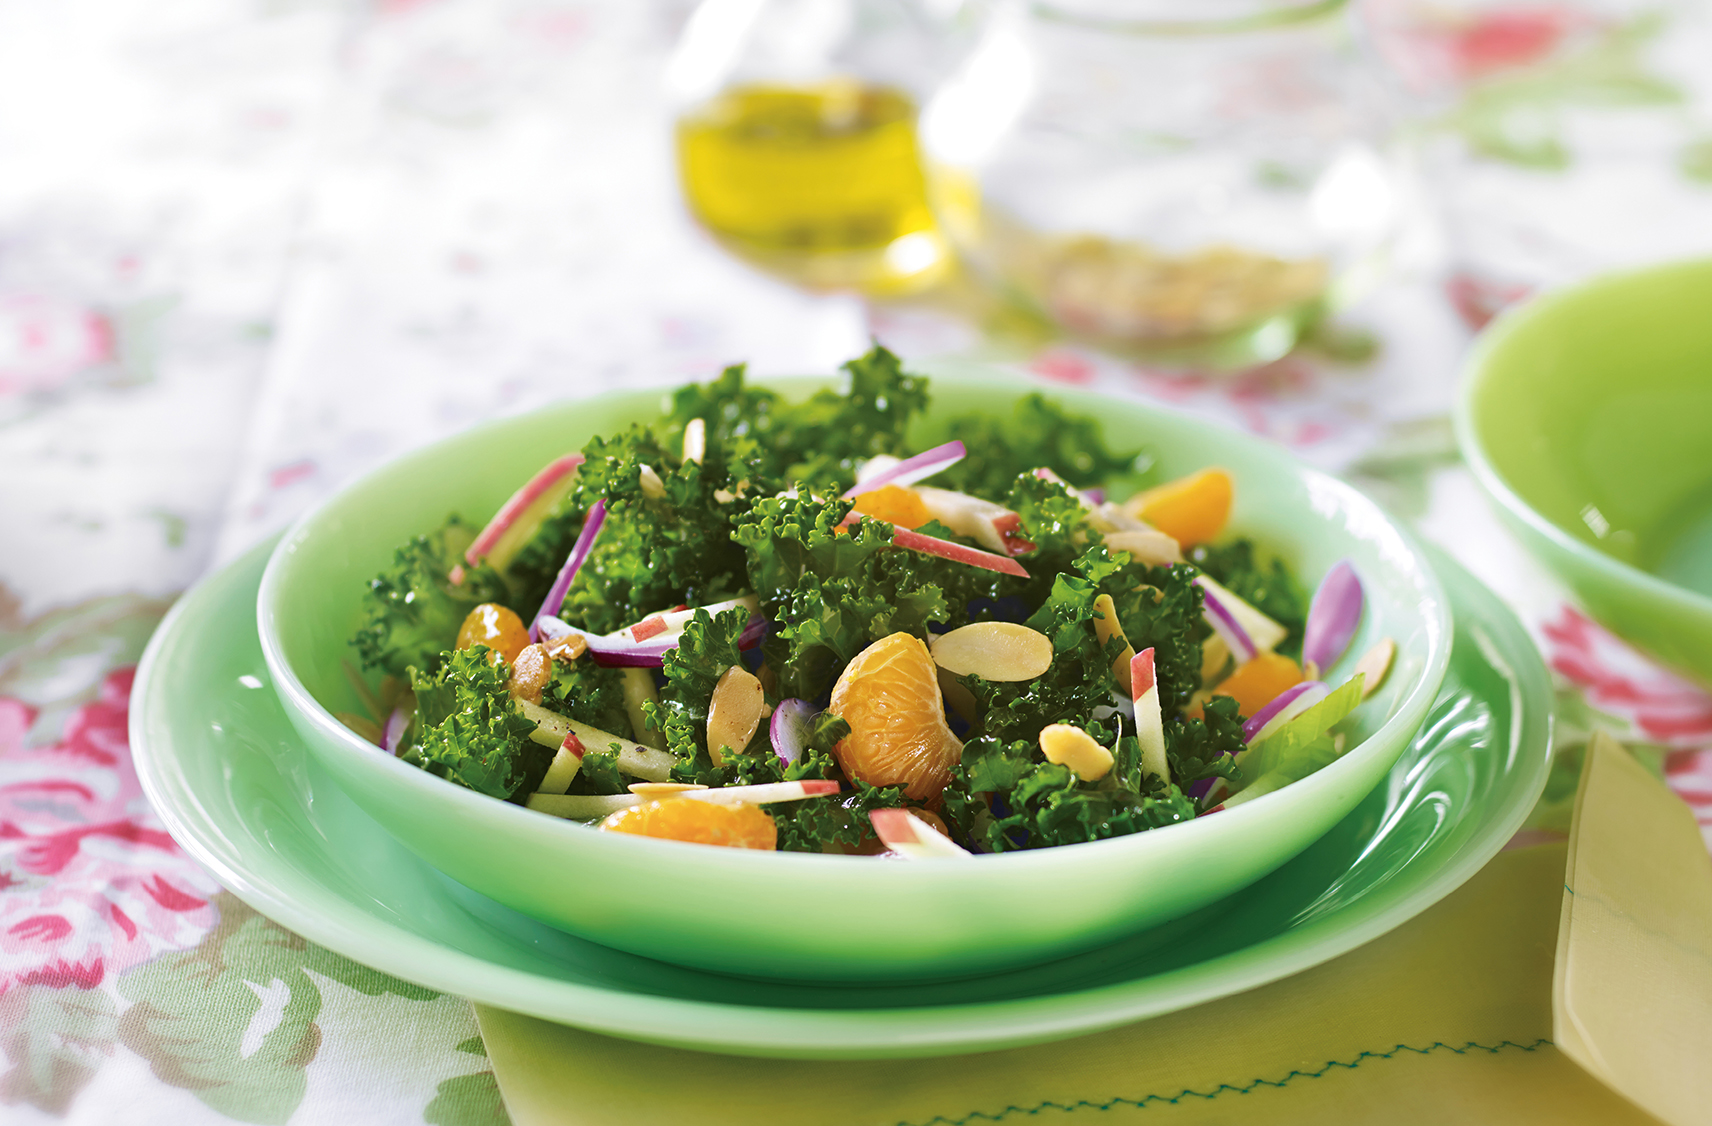 A salad bowl sitting on a lunch sized plate with a salad containing kale and mandarin oranges.